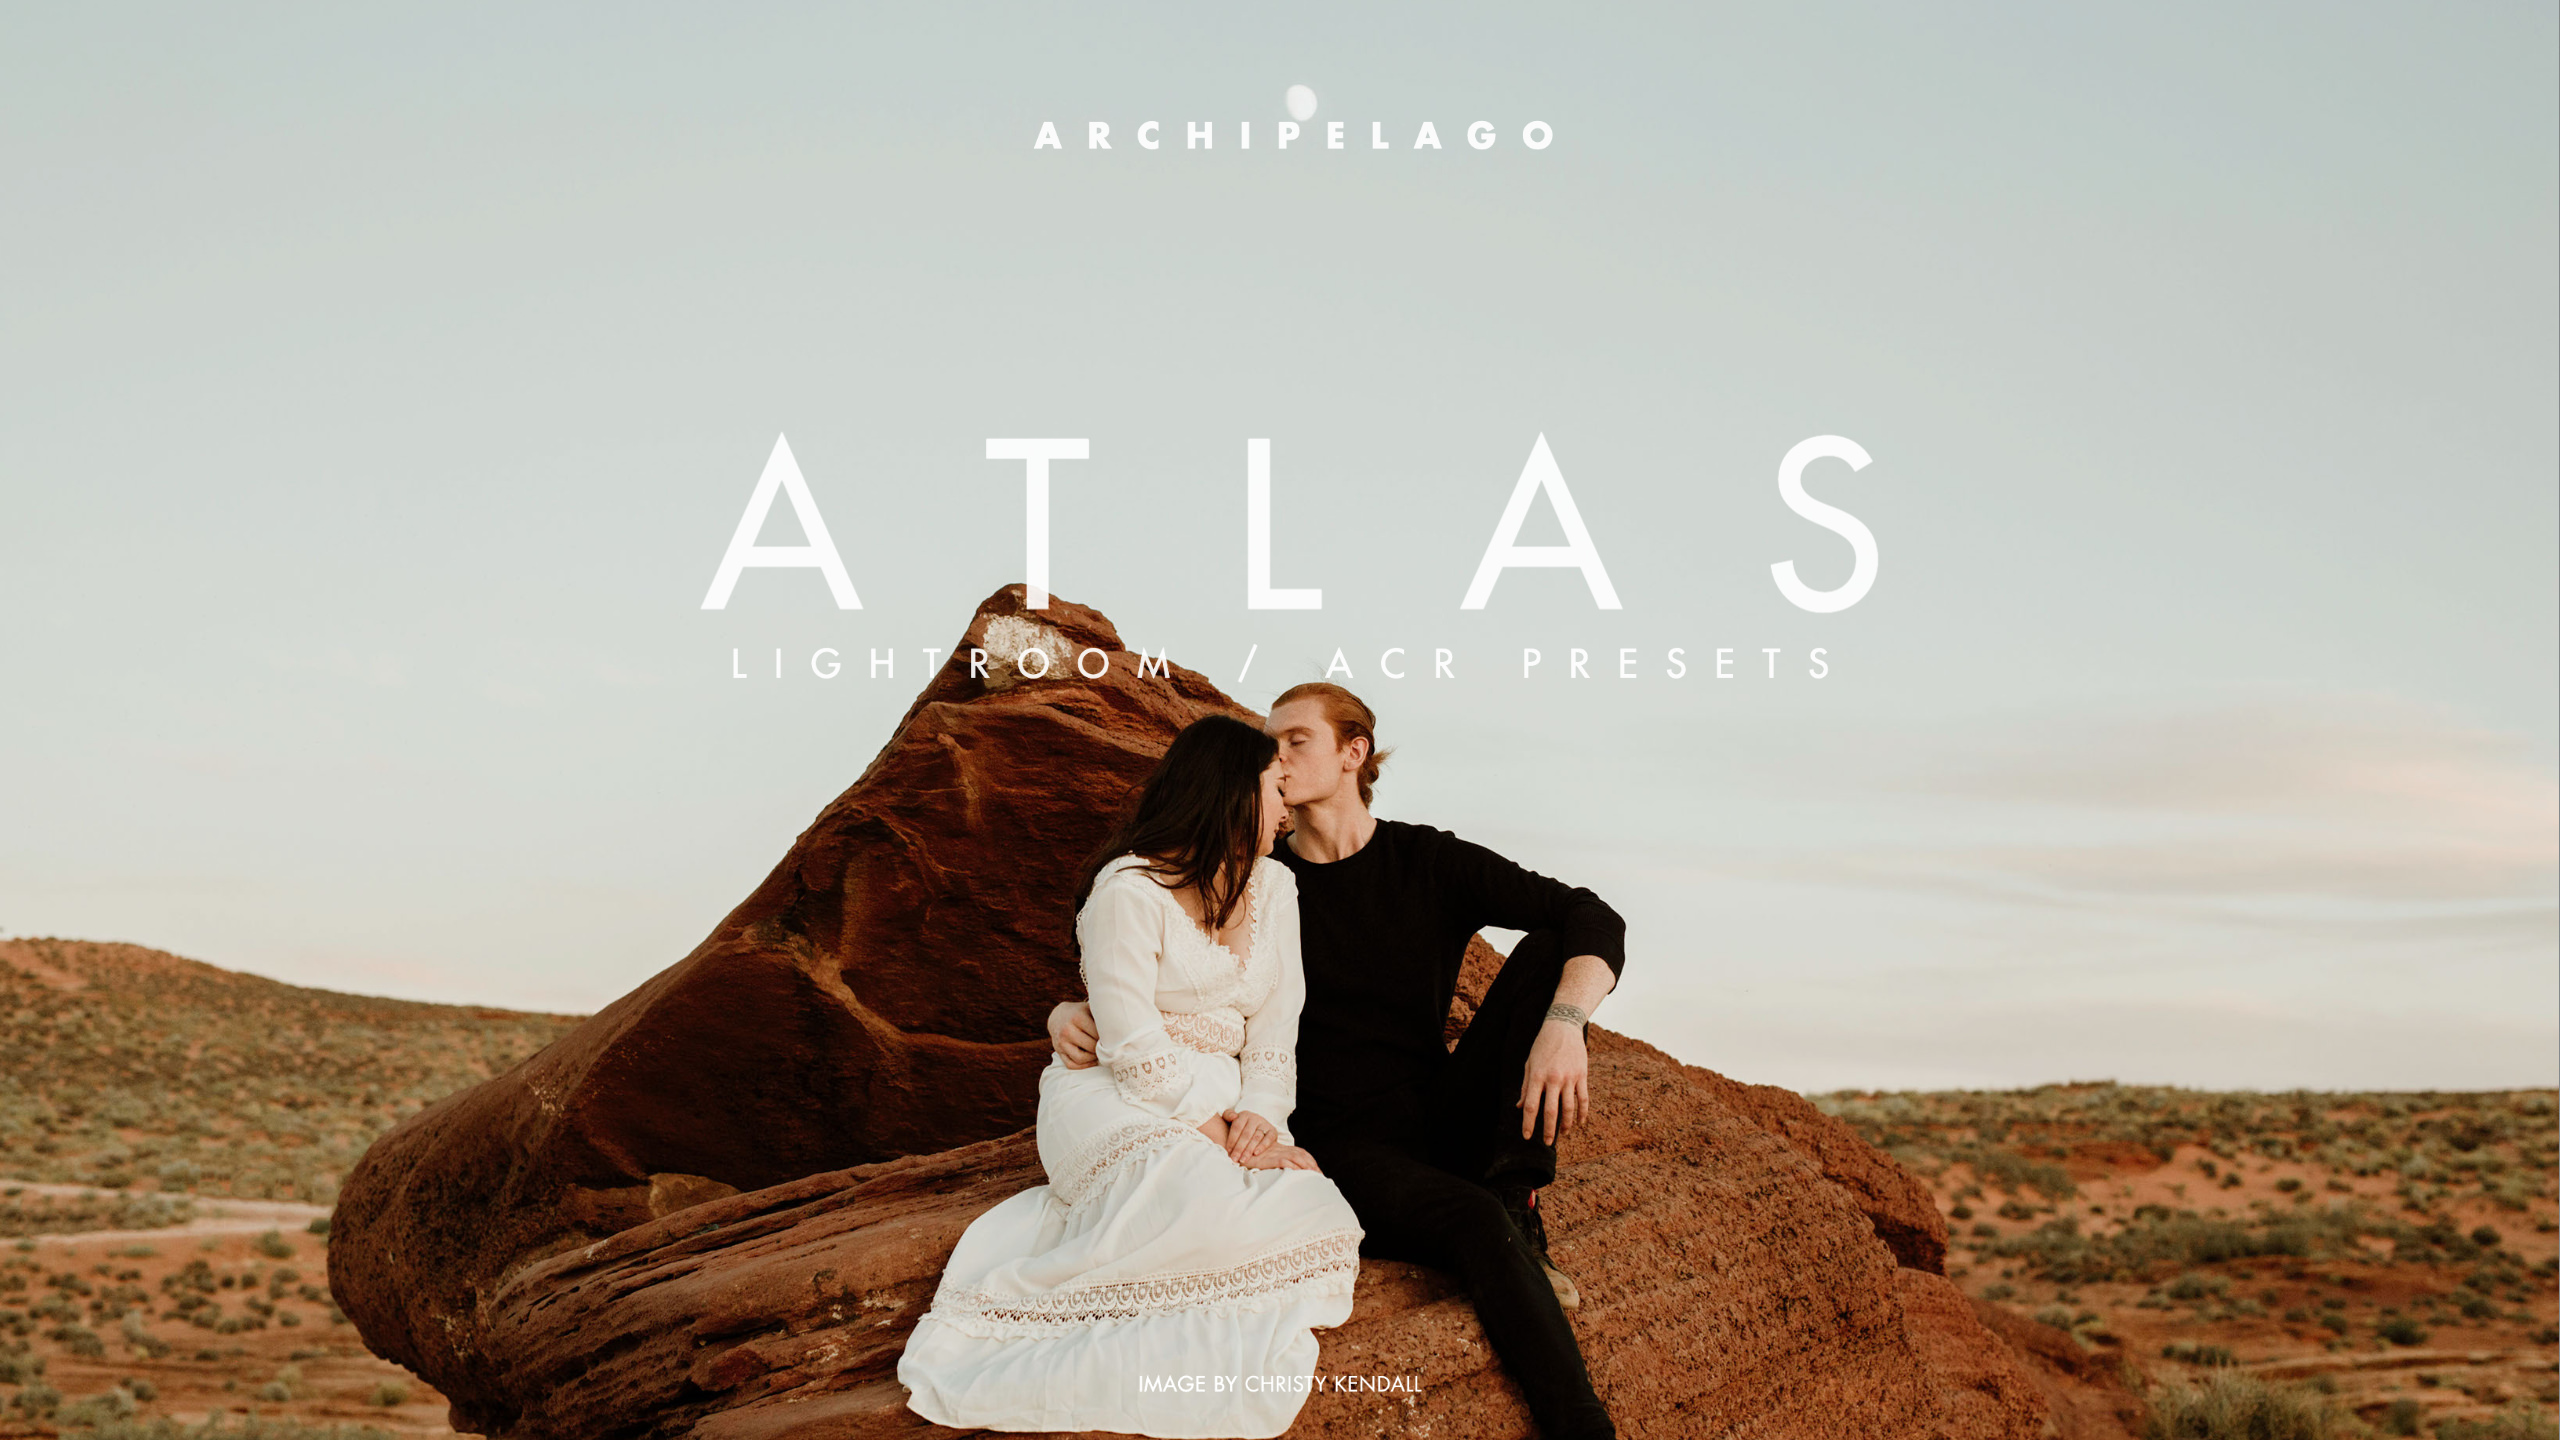 A couple kisses in the desert while displaying Atlas Lightroom presets by Archipelago.